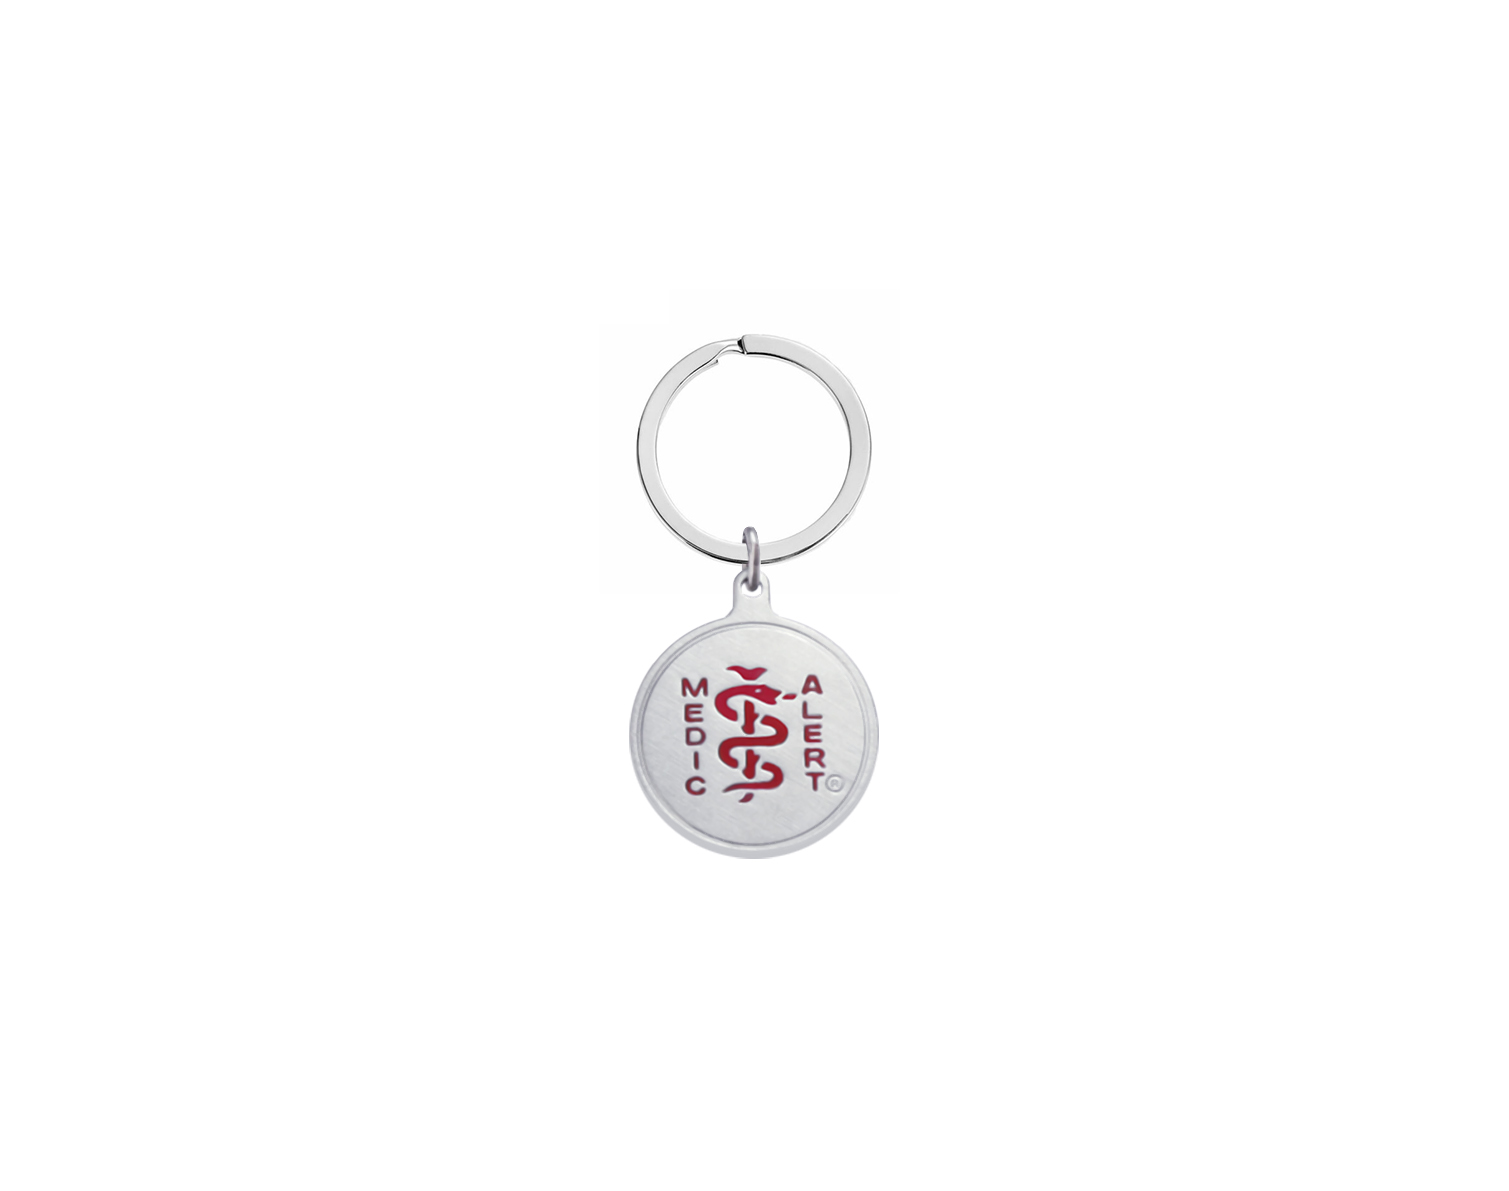 Split ring with round stainless steel charm disc with a red MedicAlert logo which includes the universal medical sign of a snake wrapped around a rod